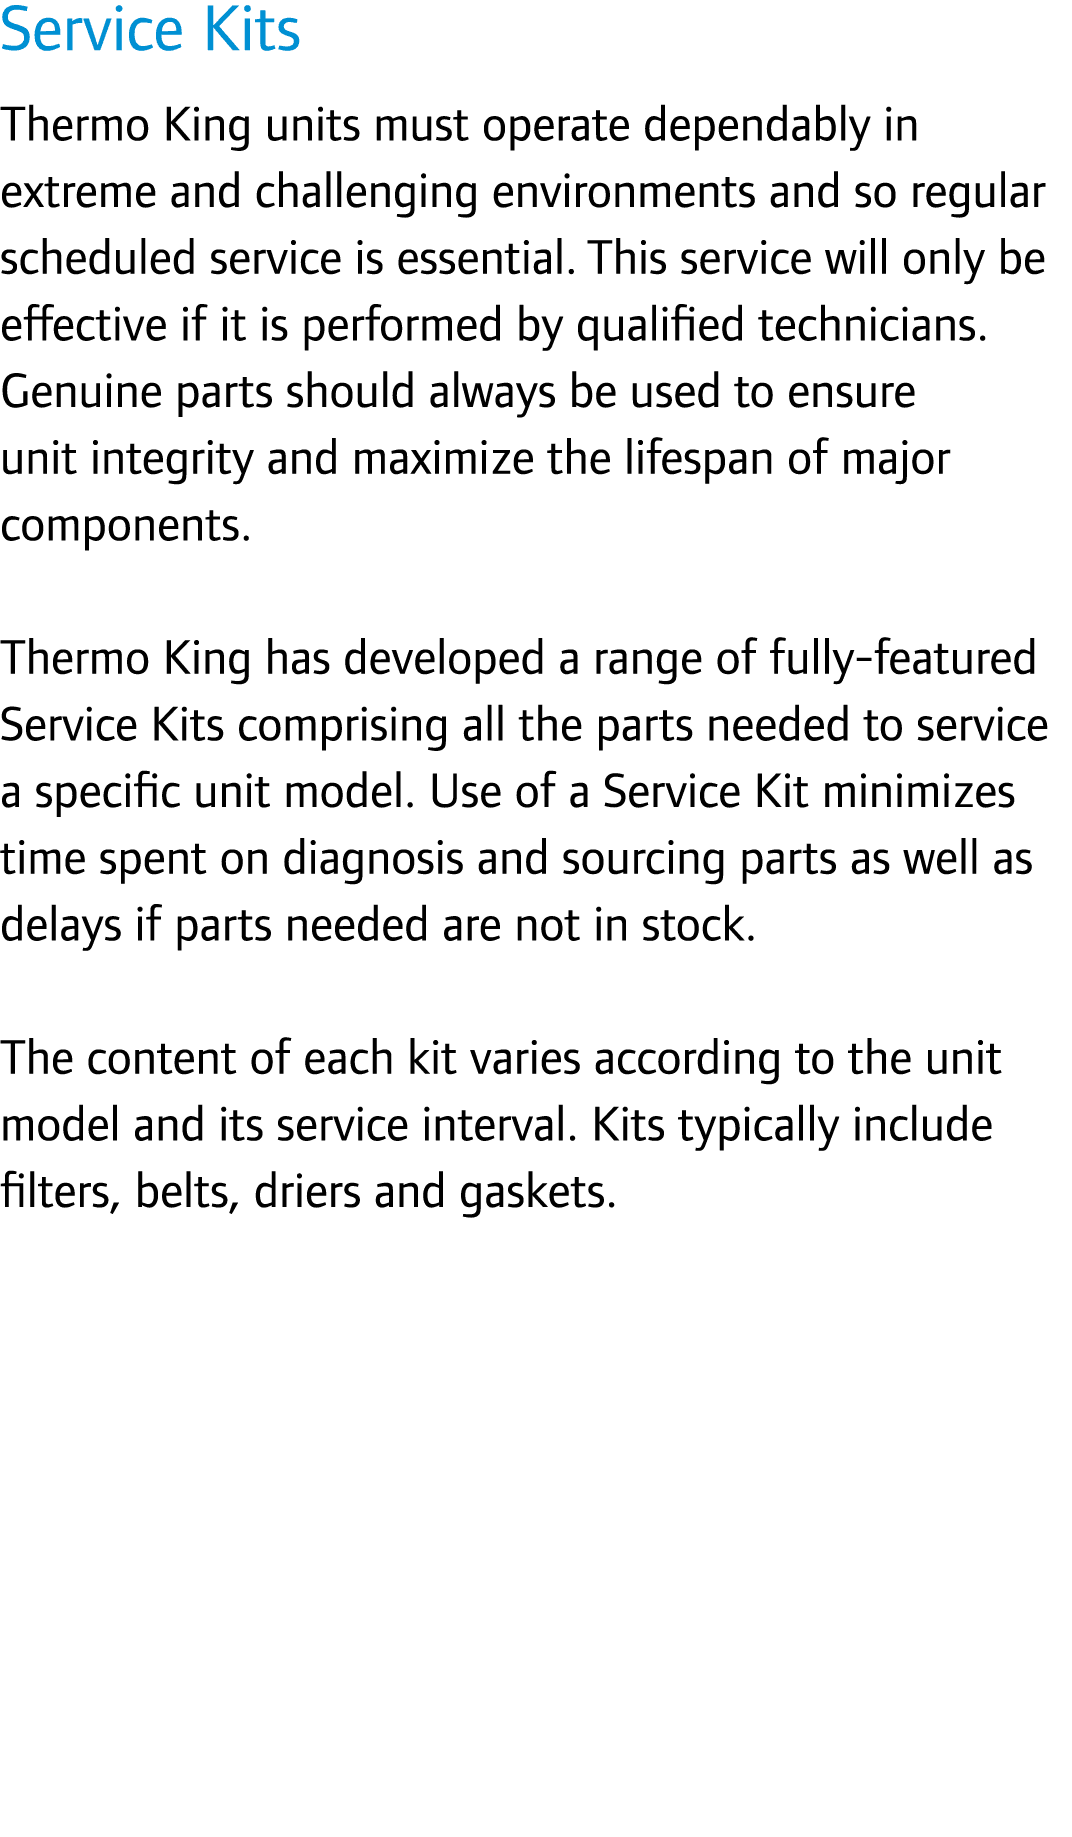 Service Kits Thermo King units must operate dependably in extreme and challenging environments and so regular schedul...